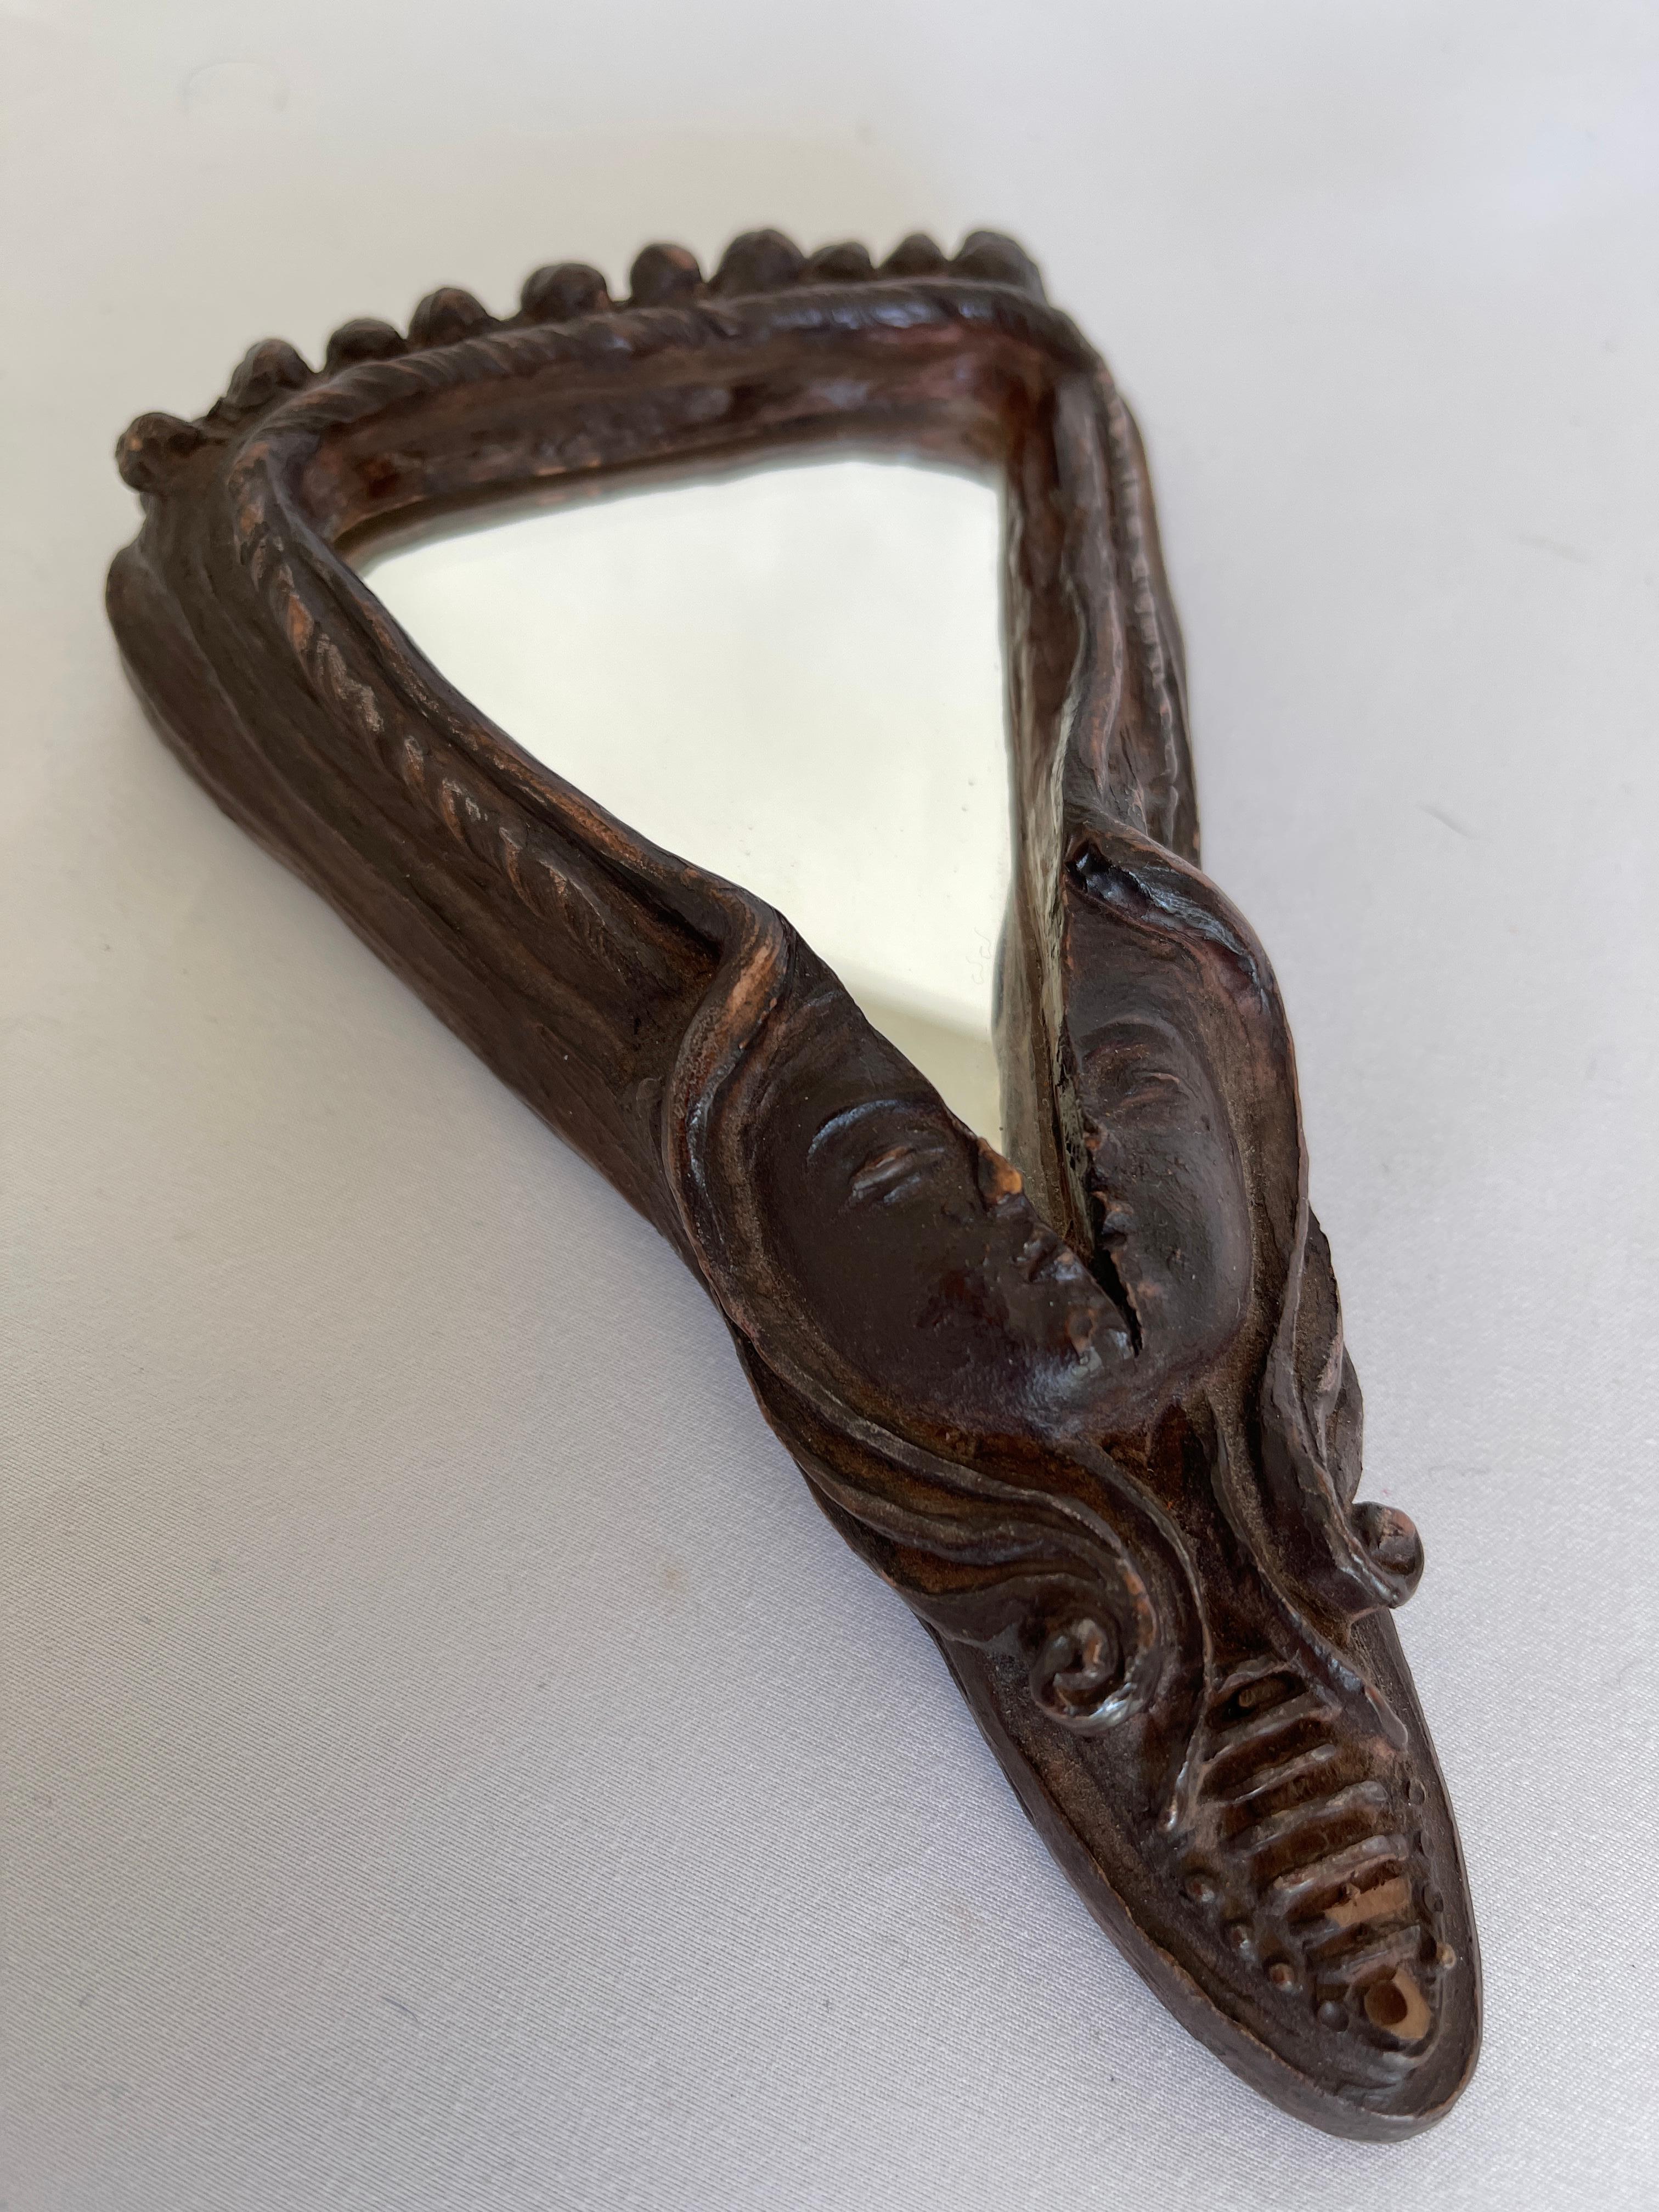 Hand carved face sculpture resin mirror hangs with wire loop at back.
USA, circa 1970's